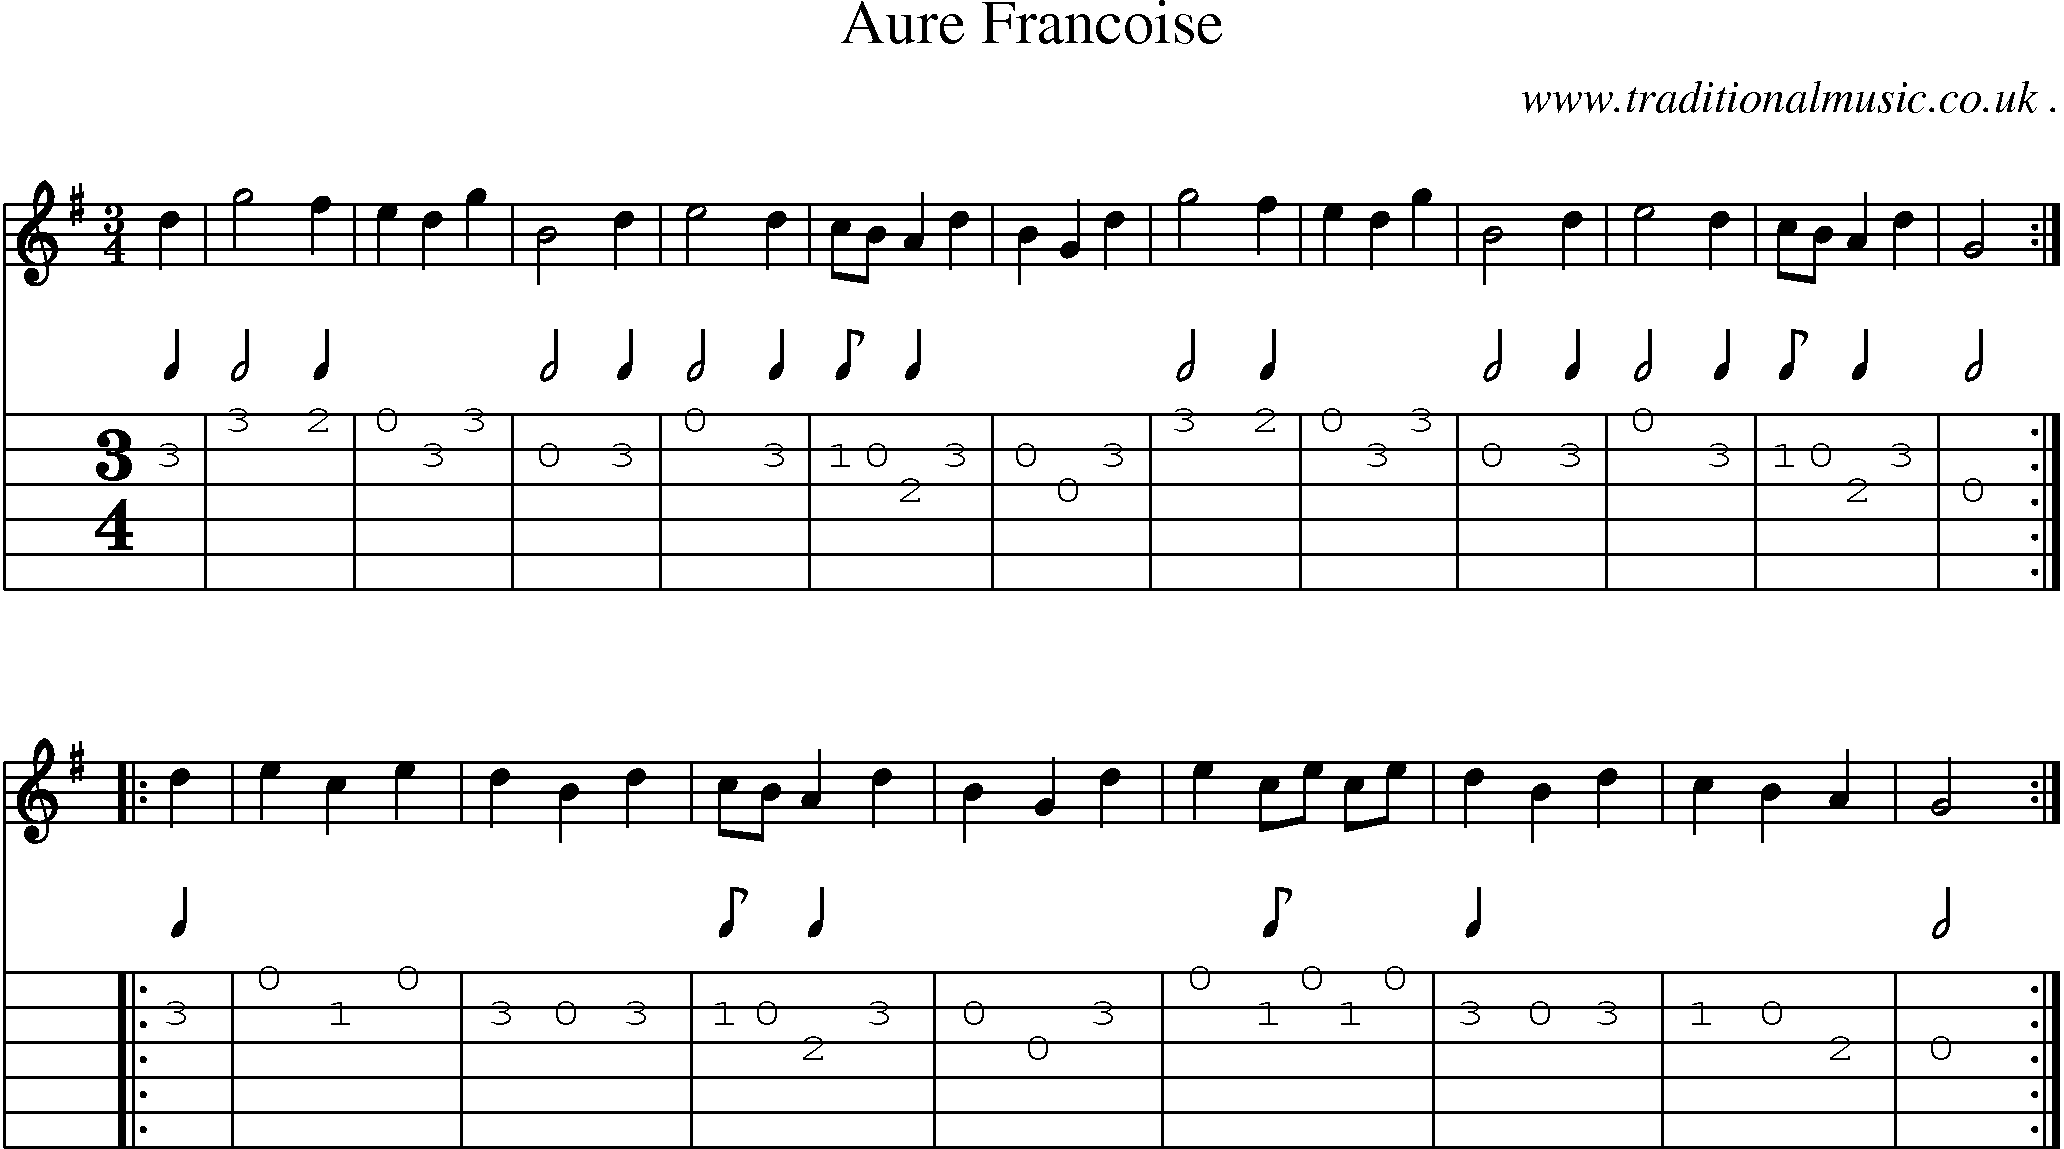 Sheet-Music and Guitar Tabs for Aure Francoise